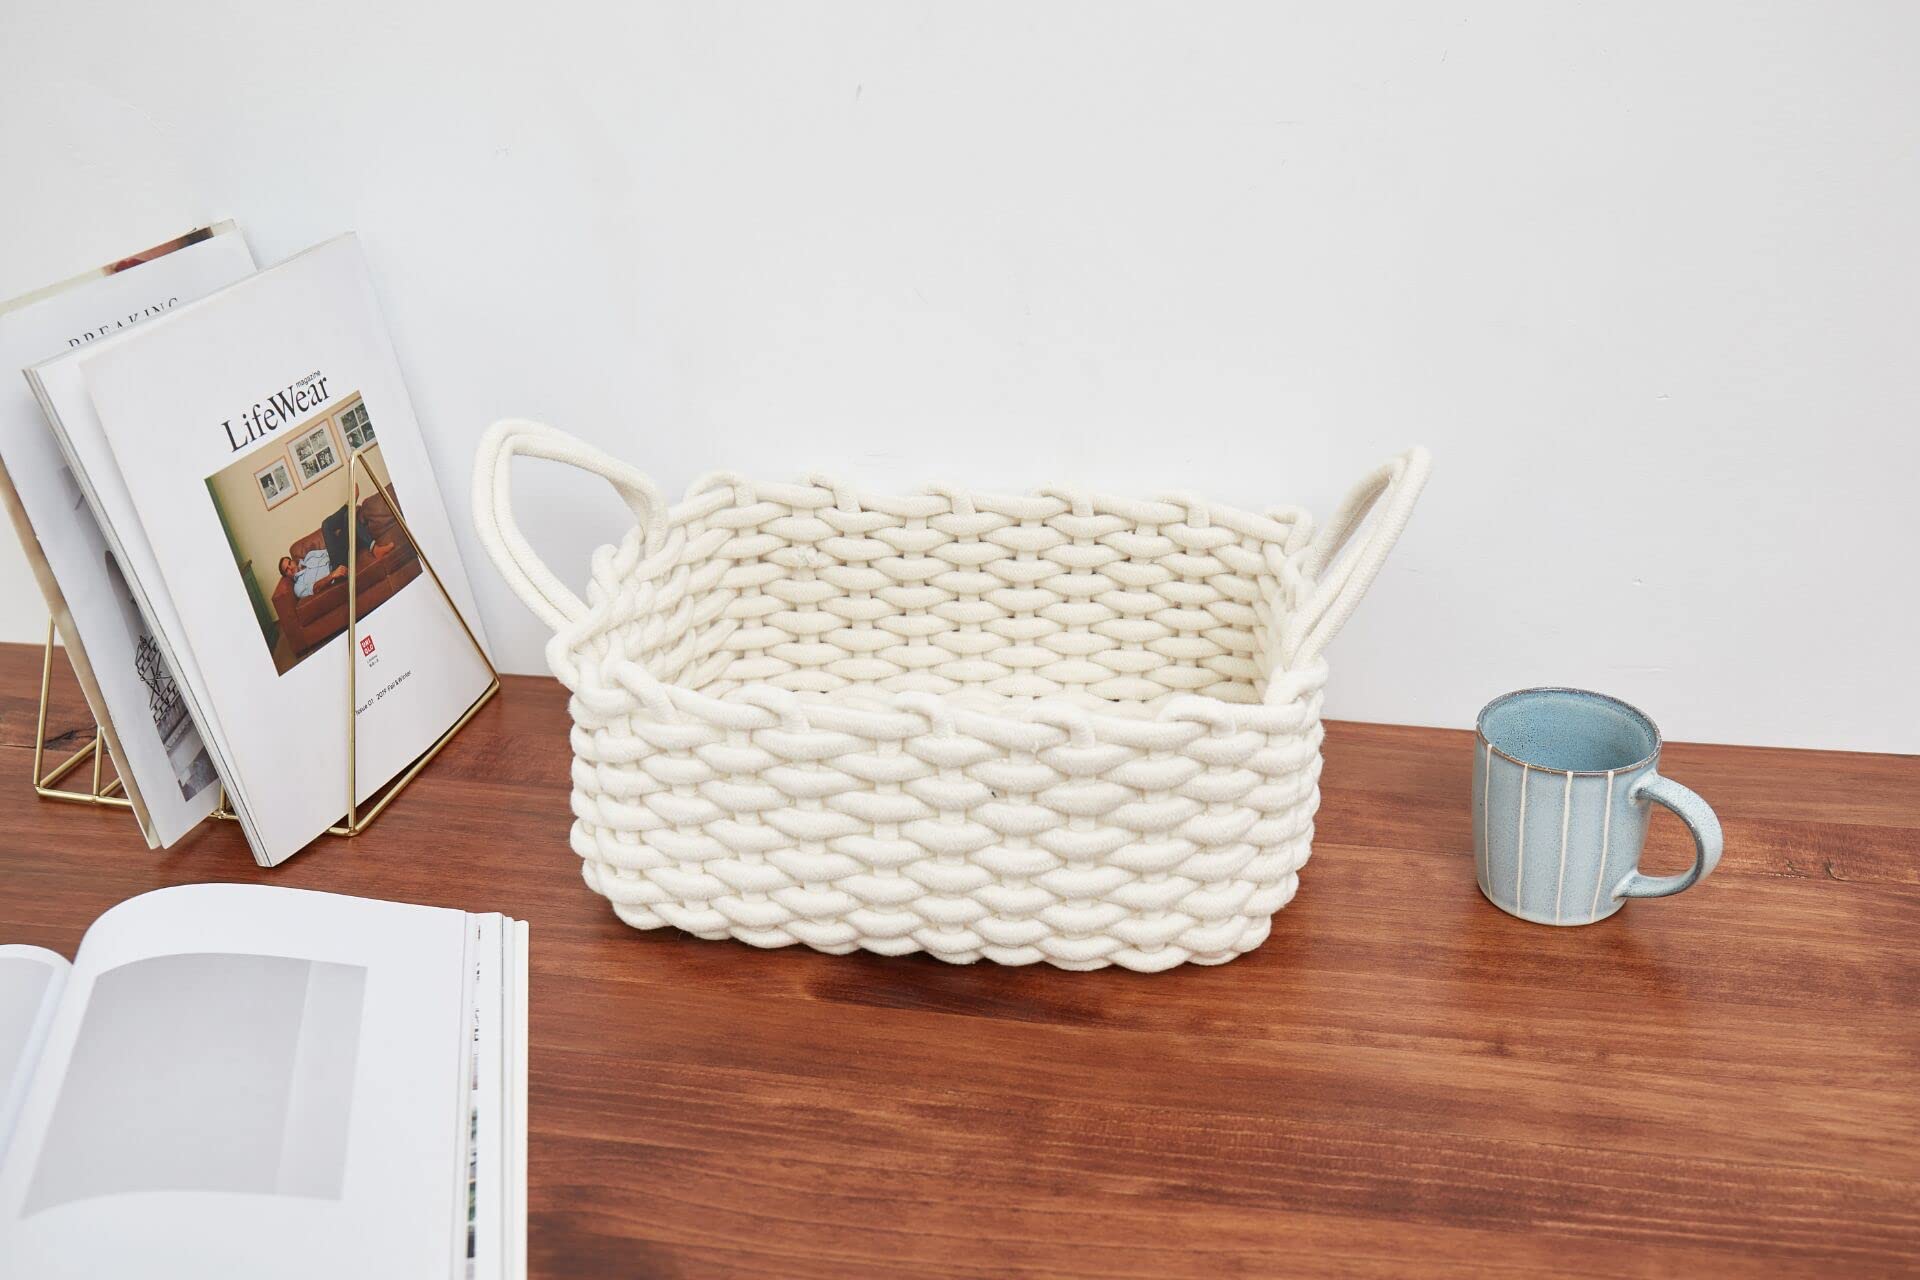 Woven Baskets, Set of 3 for Home, Office, Dorm Room, Living Room, Bedroom, Bathroom, Nursery Storage and Organization (WHITE)